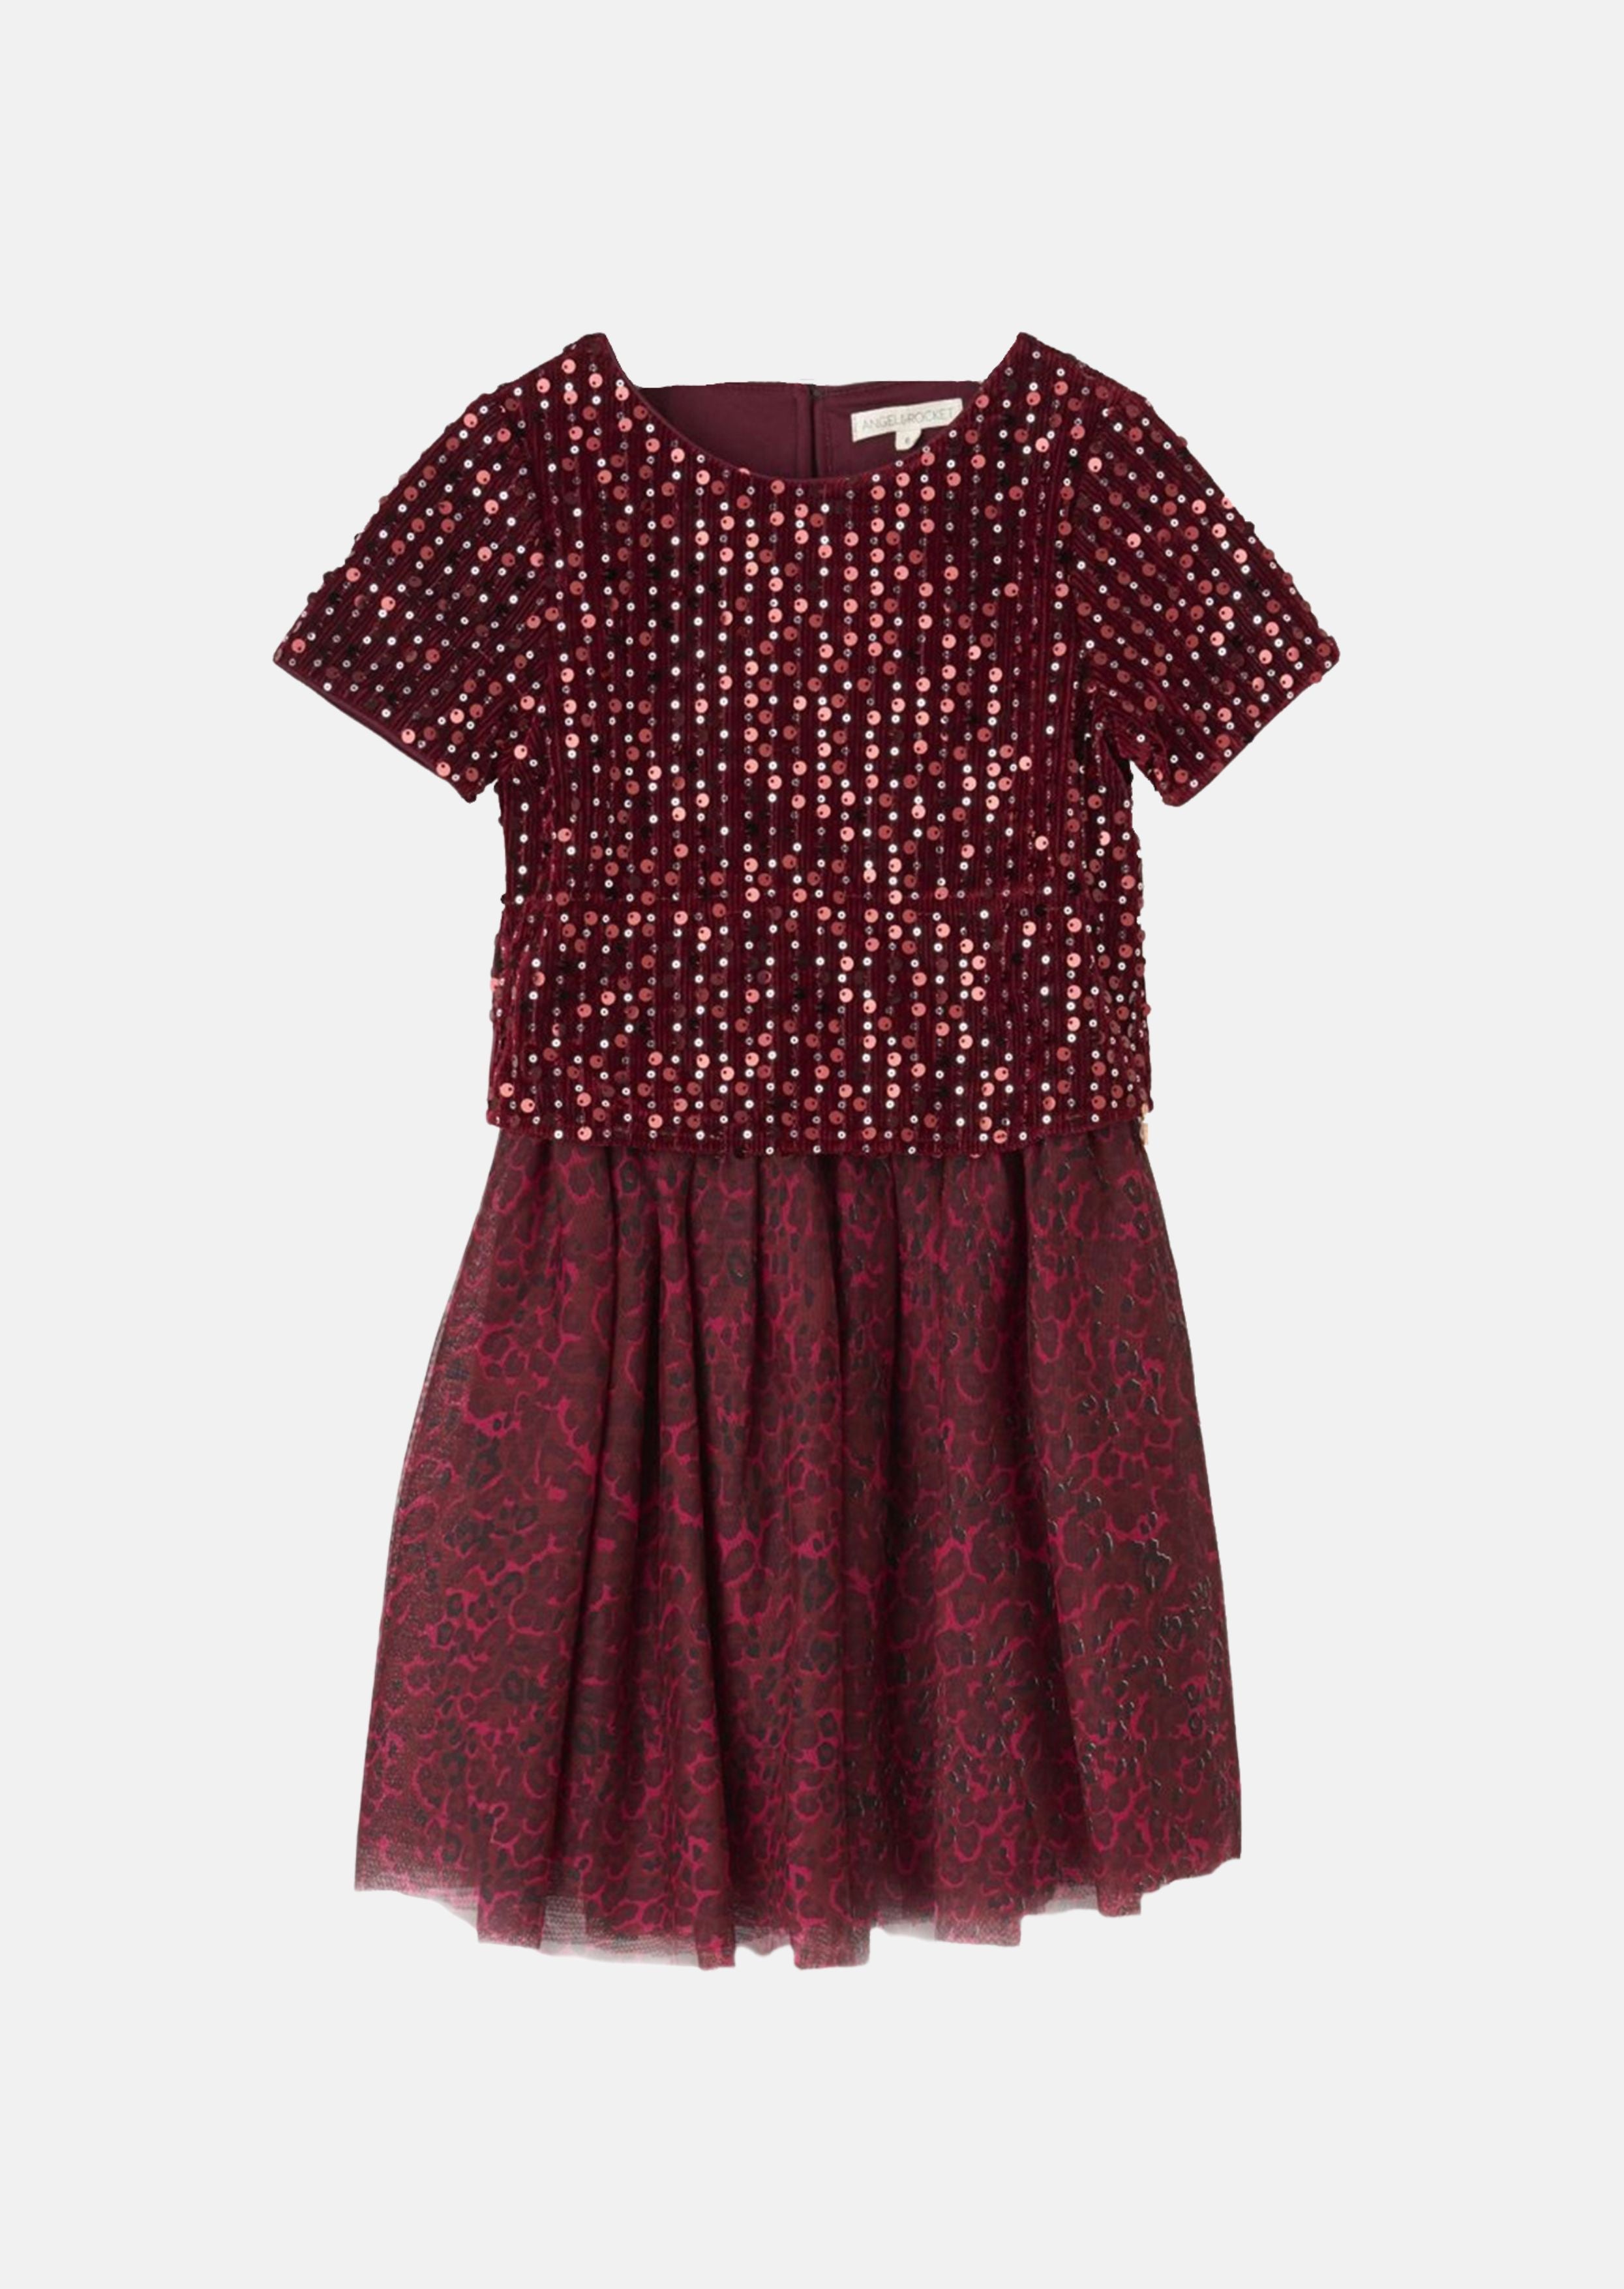 Girls Sequin Embellished and Printed Red Mesh Dress